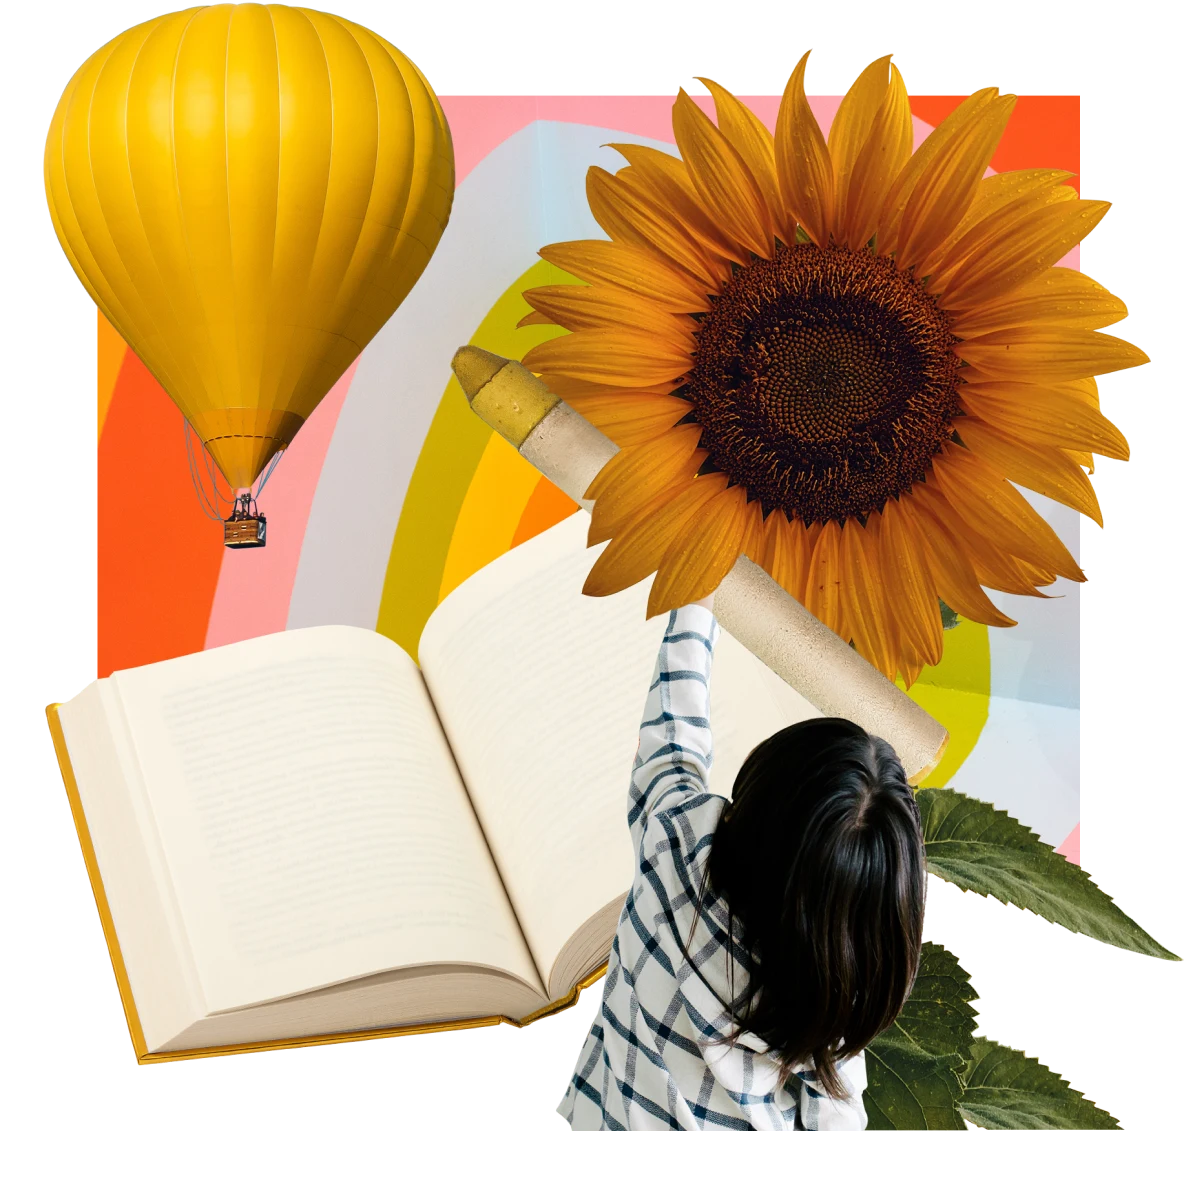 An open book is in the centre. A child reaches up for a crayon, with a sunflower above it. A yellow hot air balloon is on the left against a rainbow background.